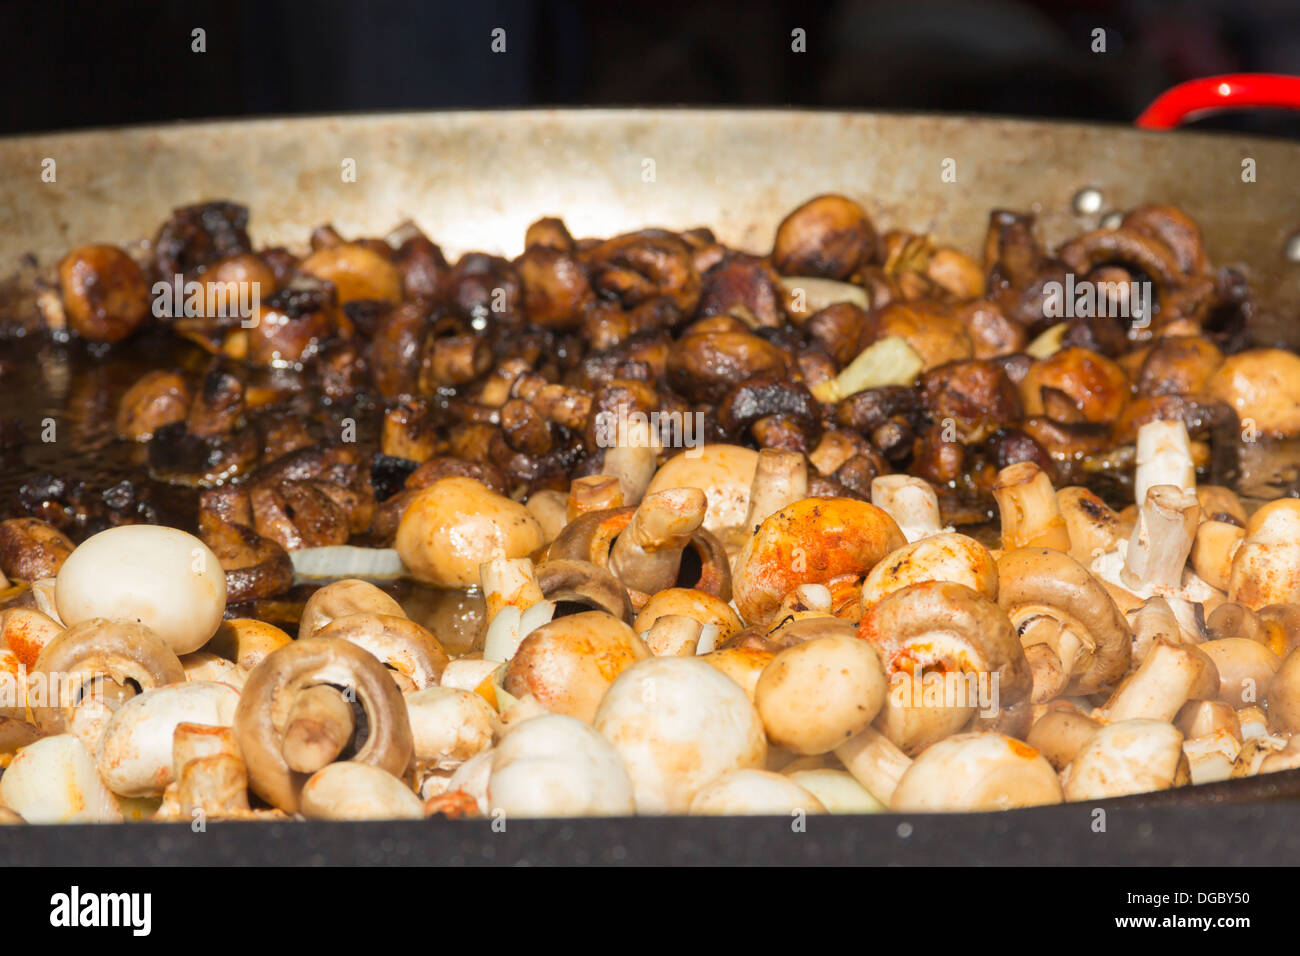 https://c8.alamy.com/comp/DGBY50/mushrooms-cooking-in-a-very-large-giant-frying-pan-at-the-bolton-food-DGBY50.jpg